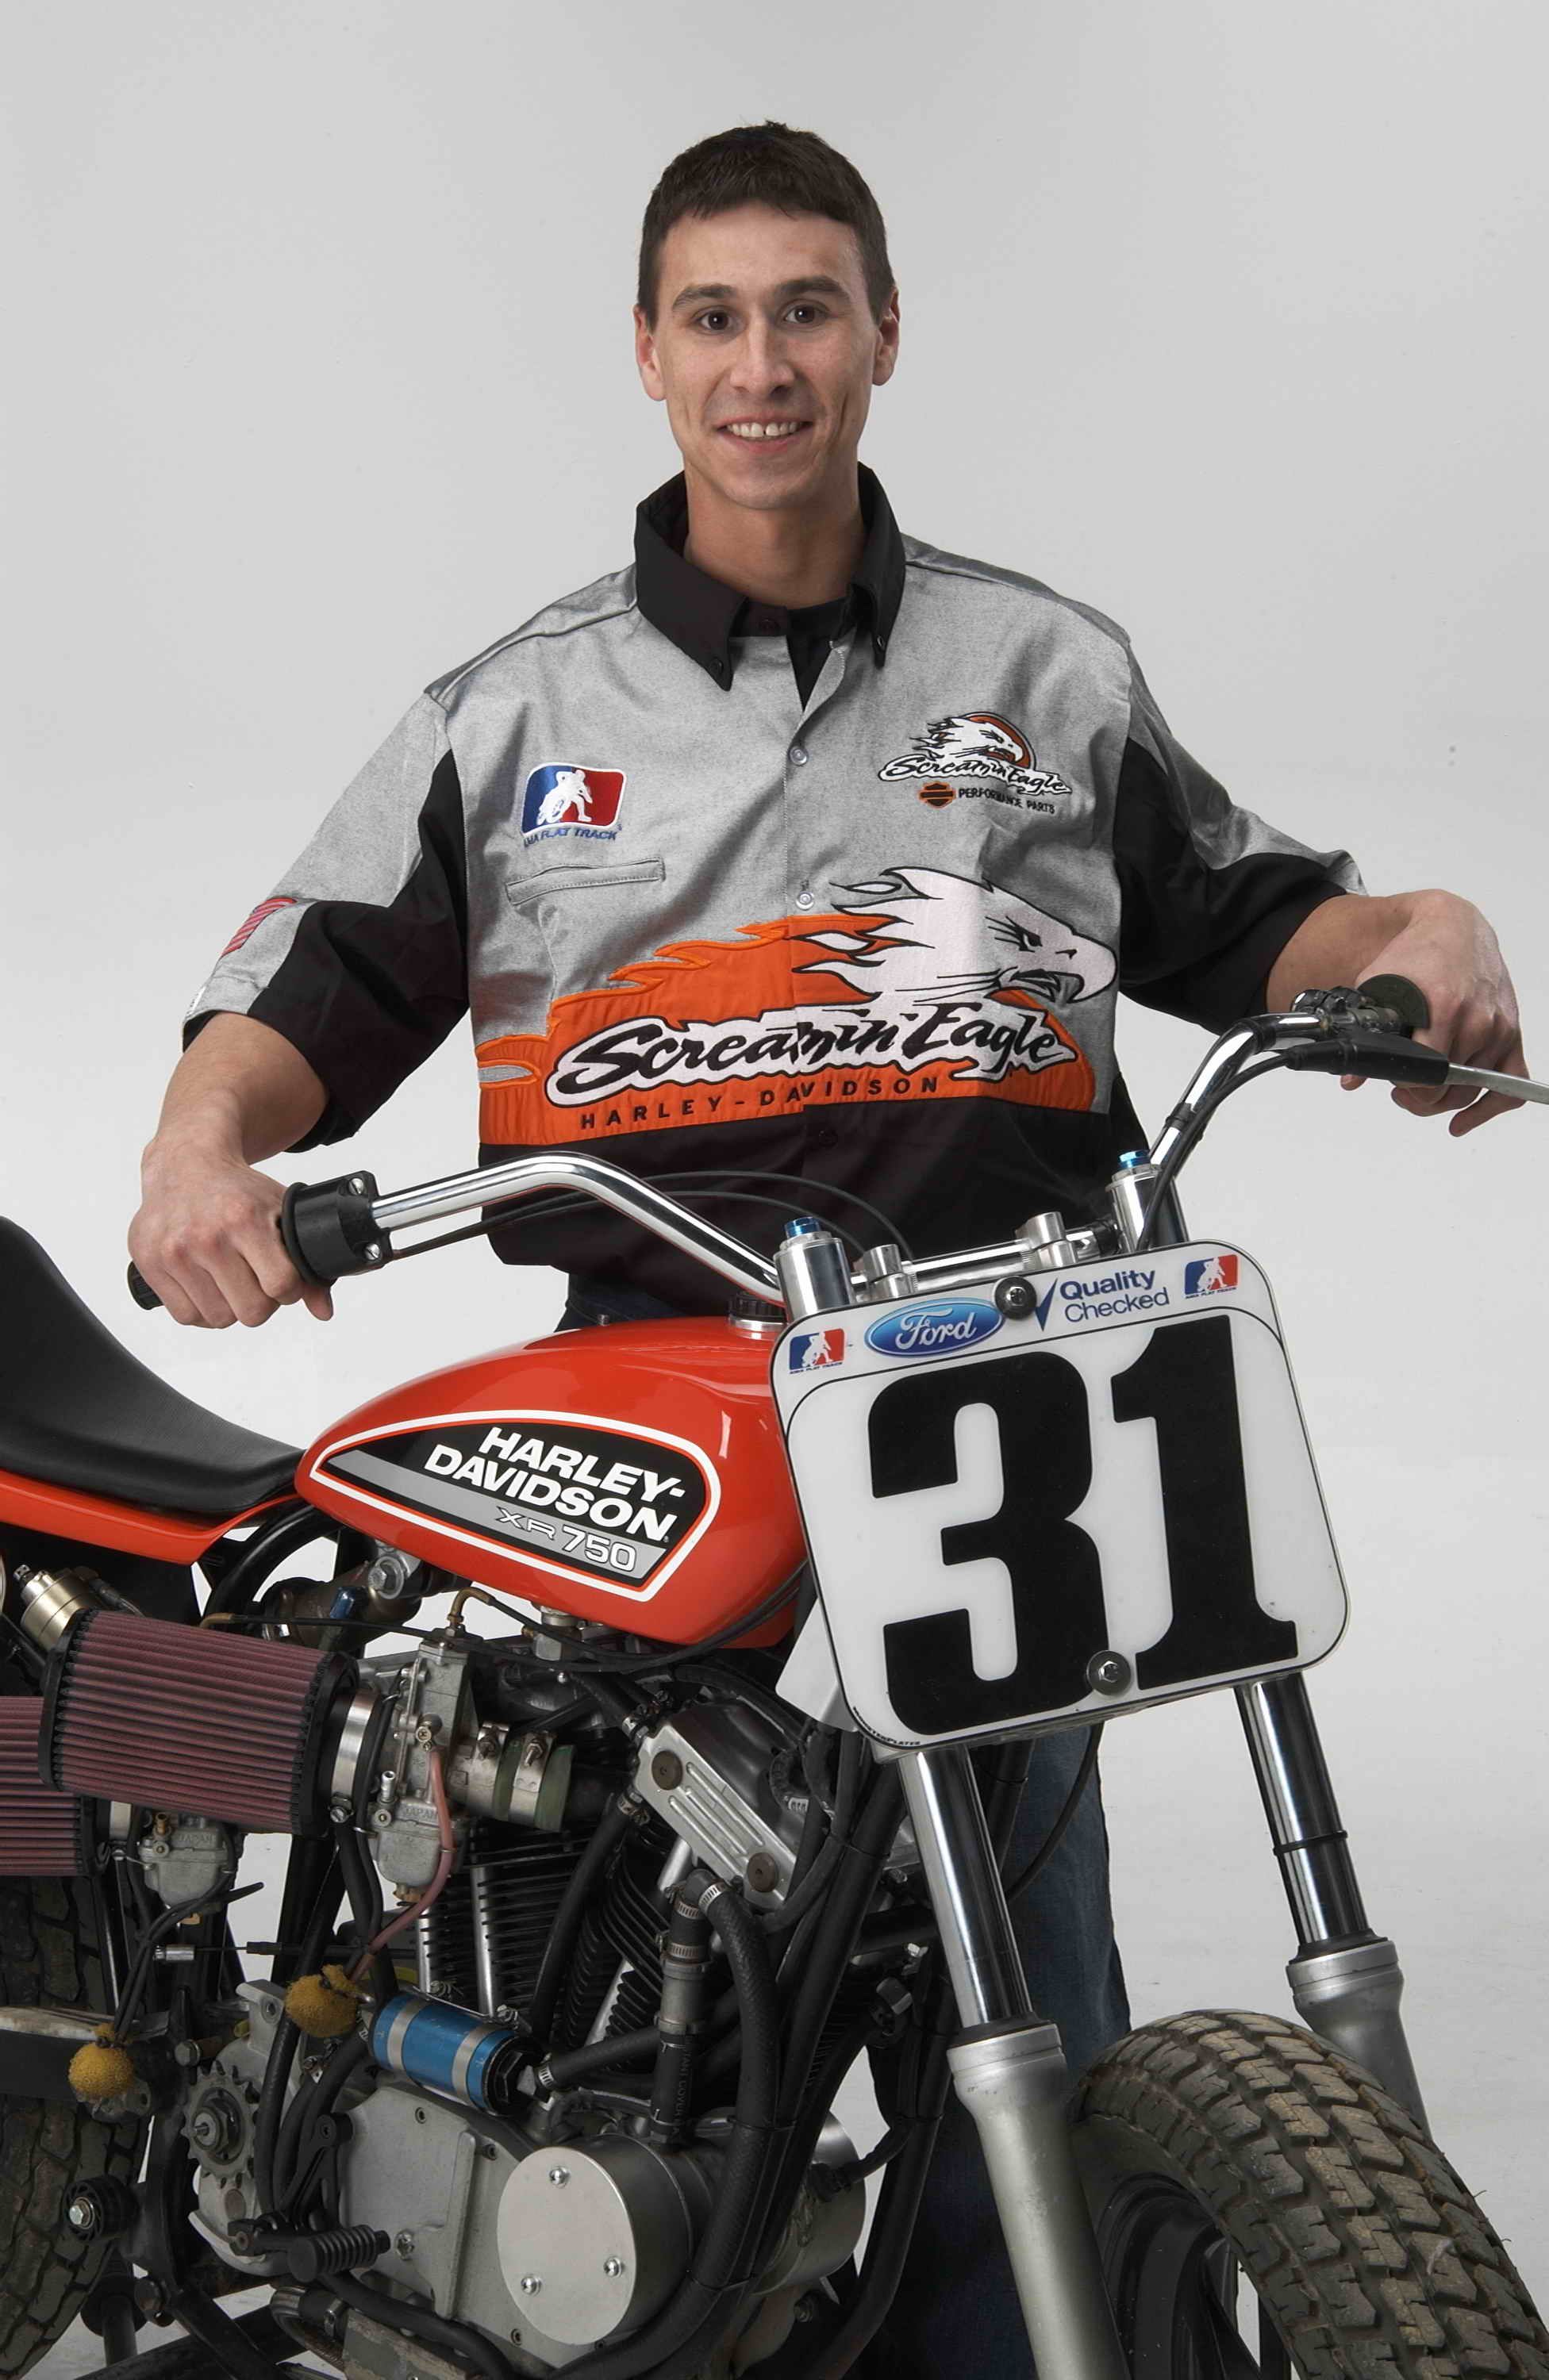 Kenny Coolbeth - 2006 and 2007 AMA Flat Track championship series winner